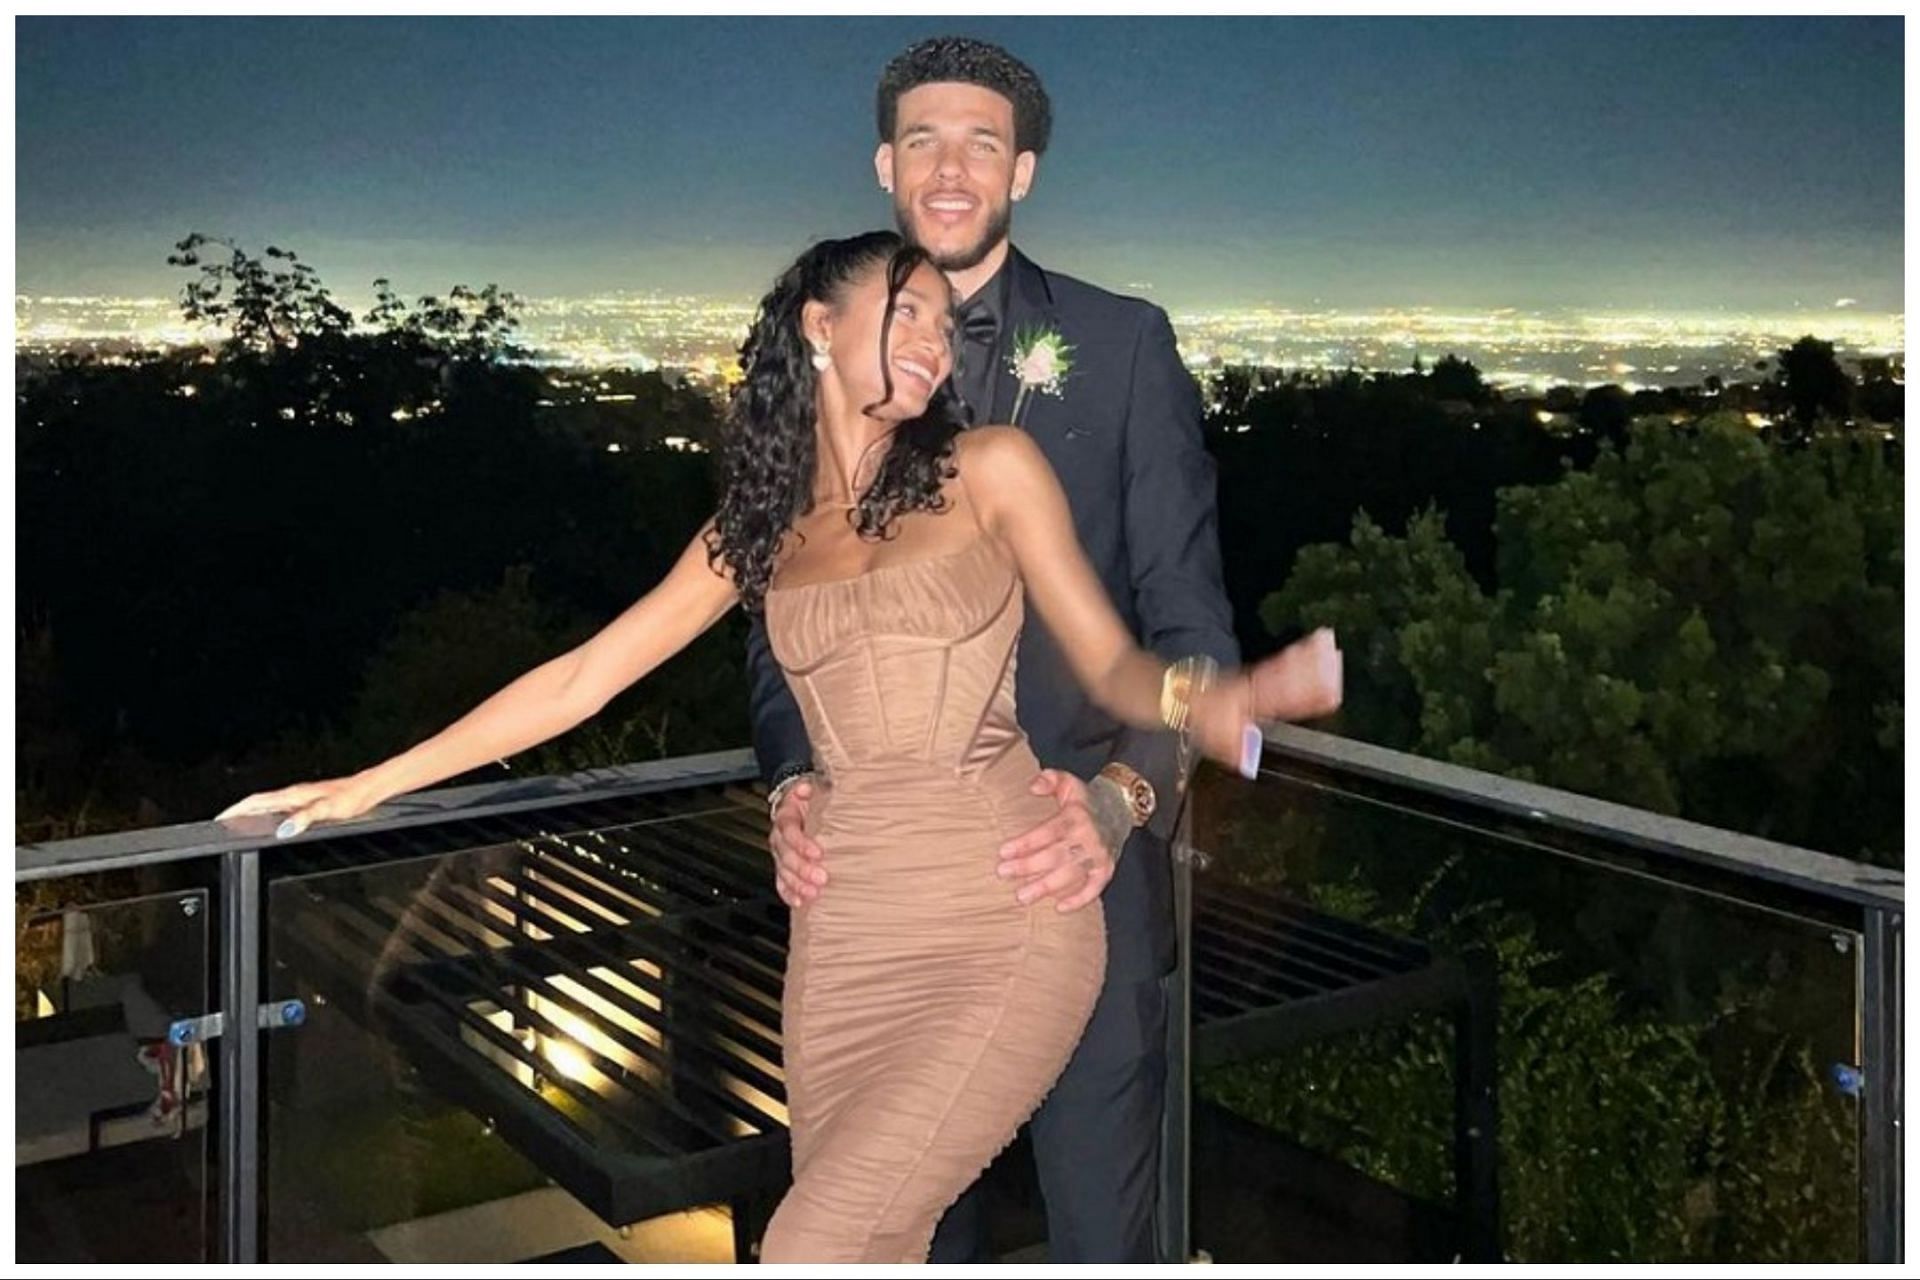 Lonzo Ball took to Instagram to celebrate the 26th birthday of his girlfriend Ally Rossel (PHOTO VIA ALLY ROSSEL INSTAGRAM PAGE)